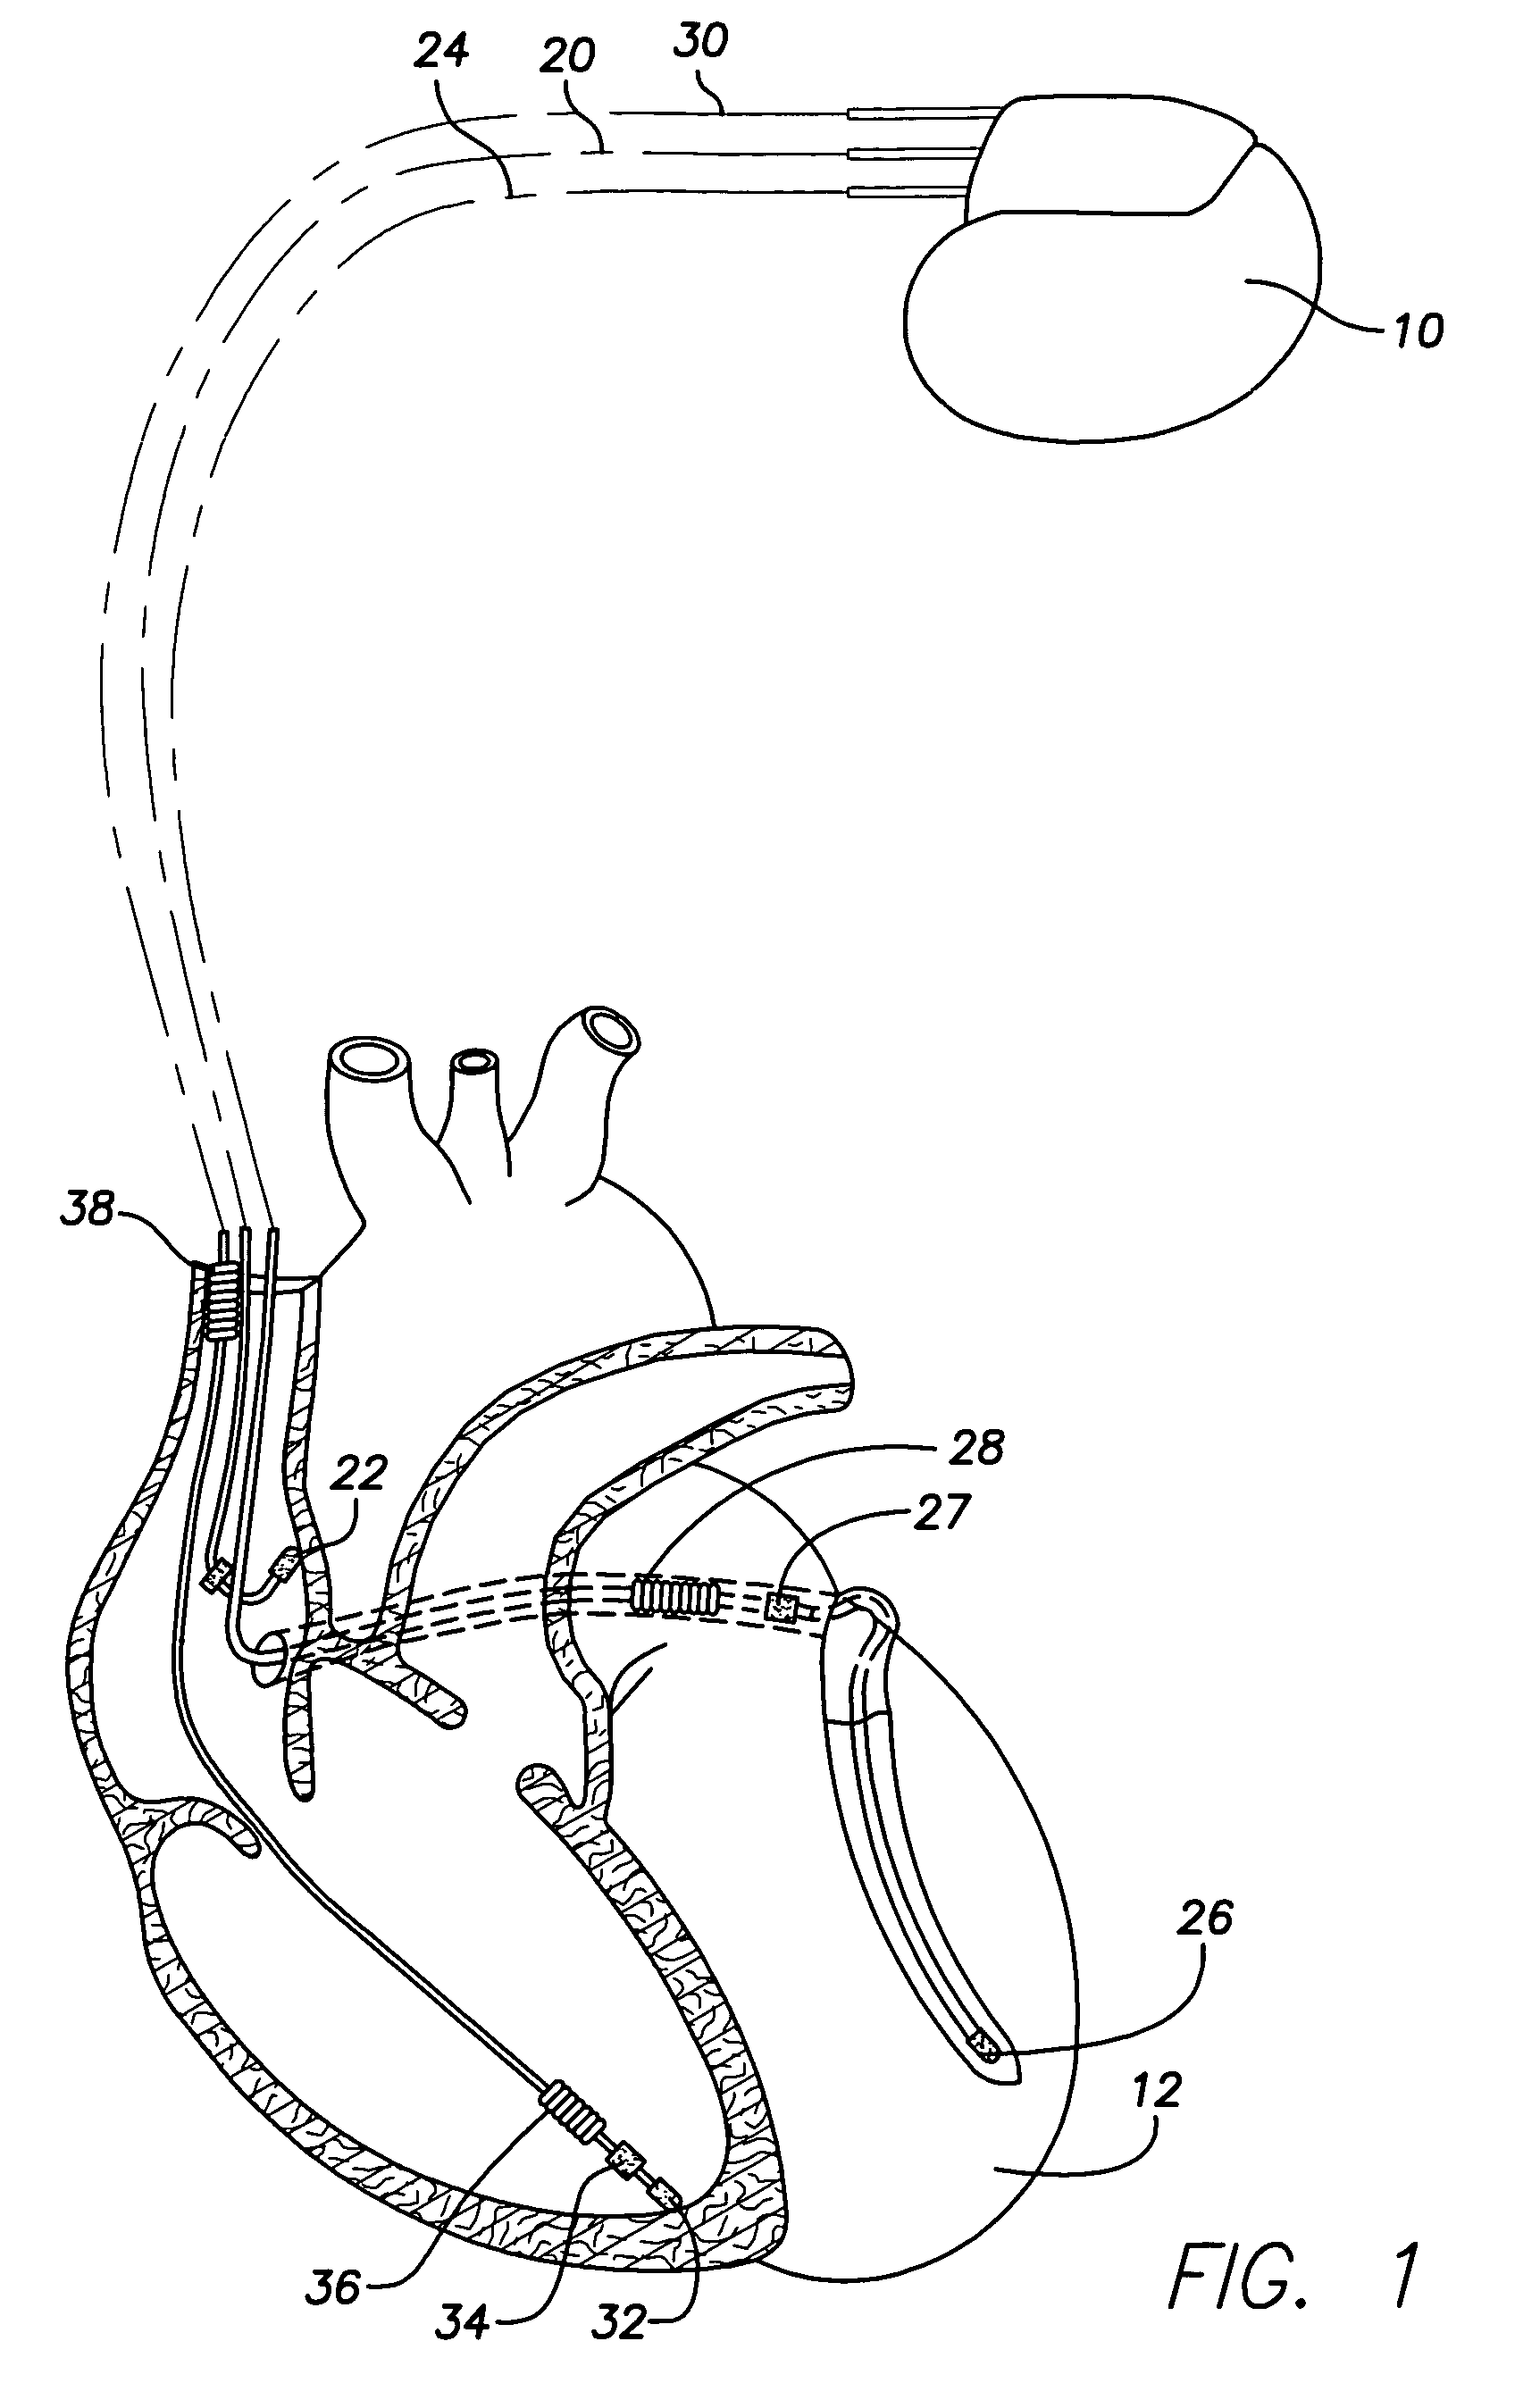 Implantable cardiac device providing rapid pacing T wave alternan pattern detection and method